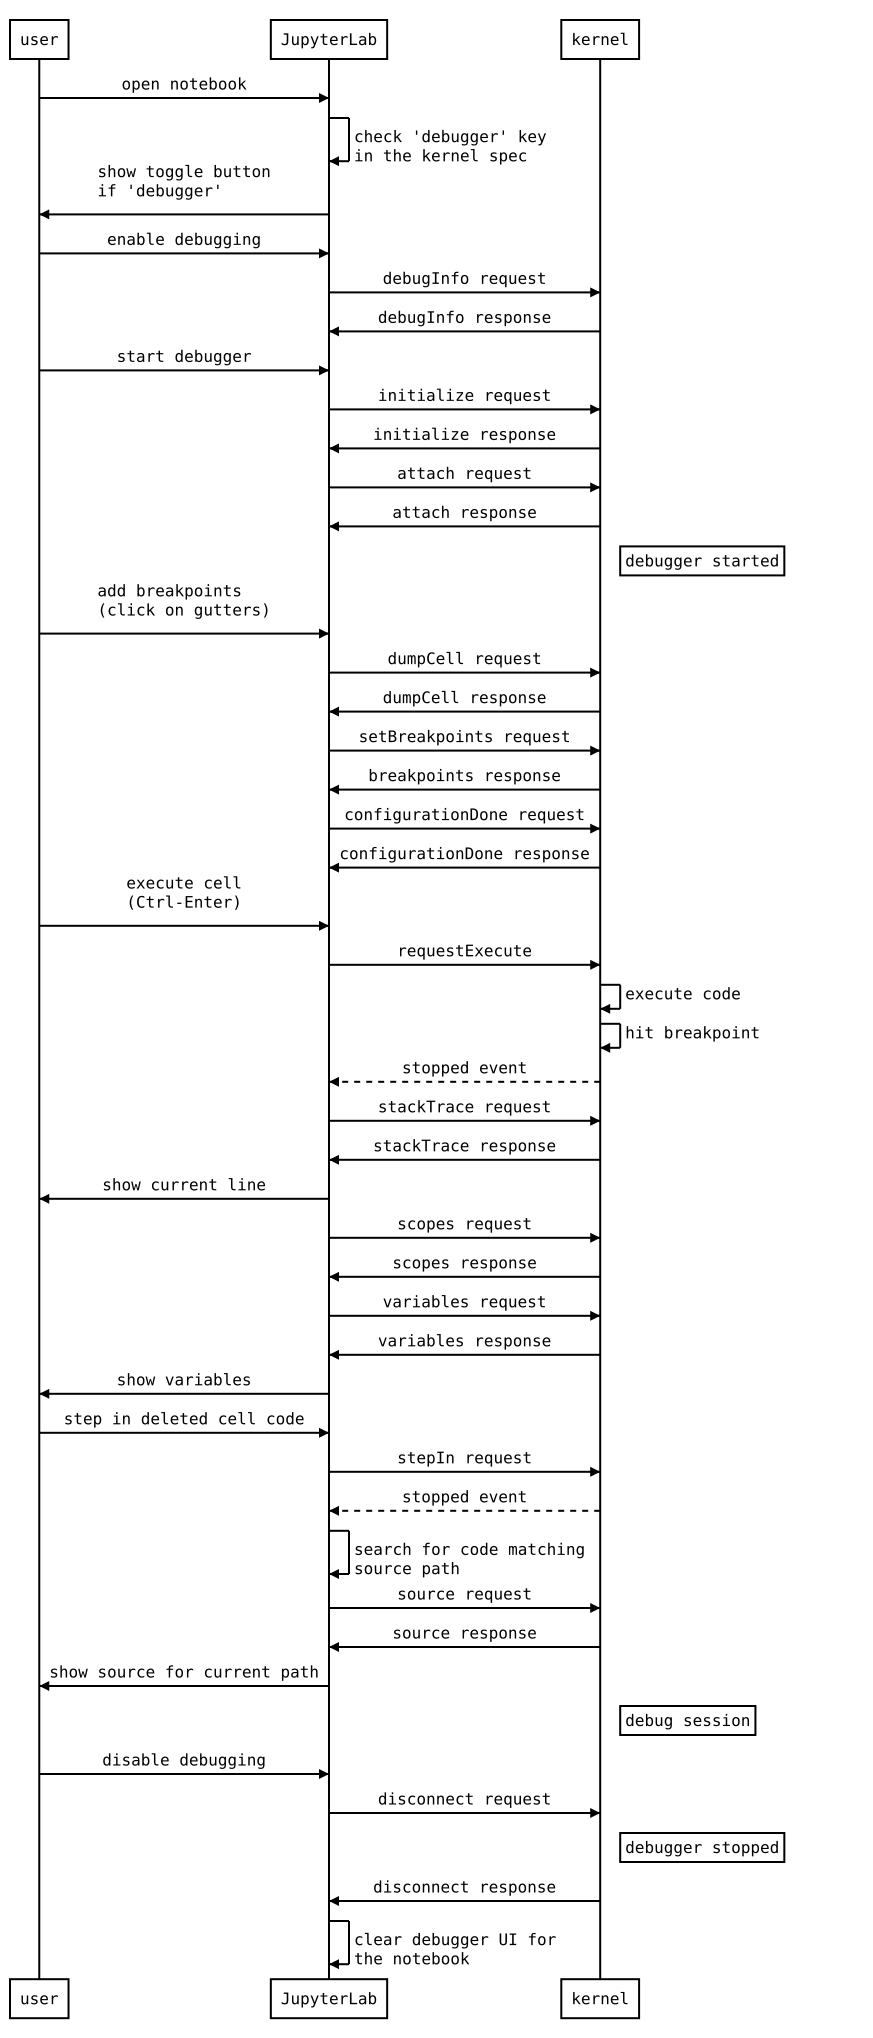 UML sequence diagram illustrating the interaction between a user, JupyterLab, and the kernel. From top to bottom, the timeline starts with opening the notebook and includes annotations where the debugger is started and stopped. Specific interactions and message types are discussed in the subsequent text.